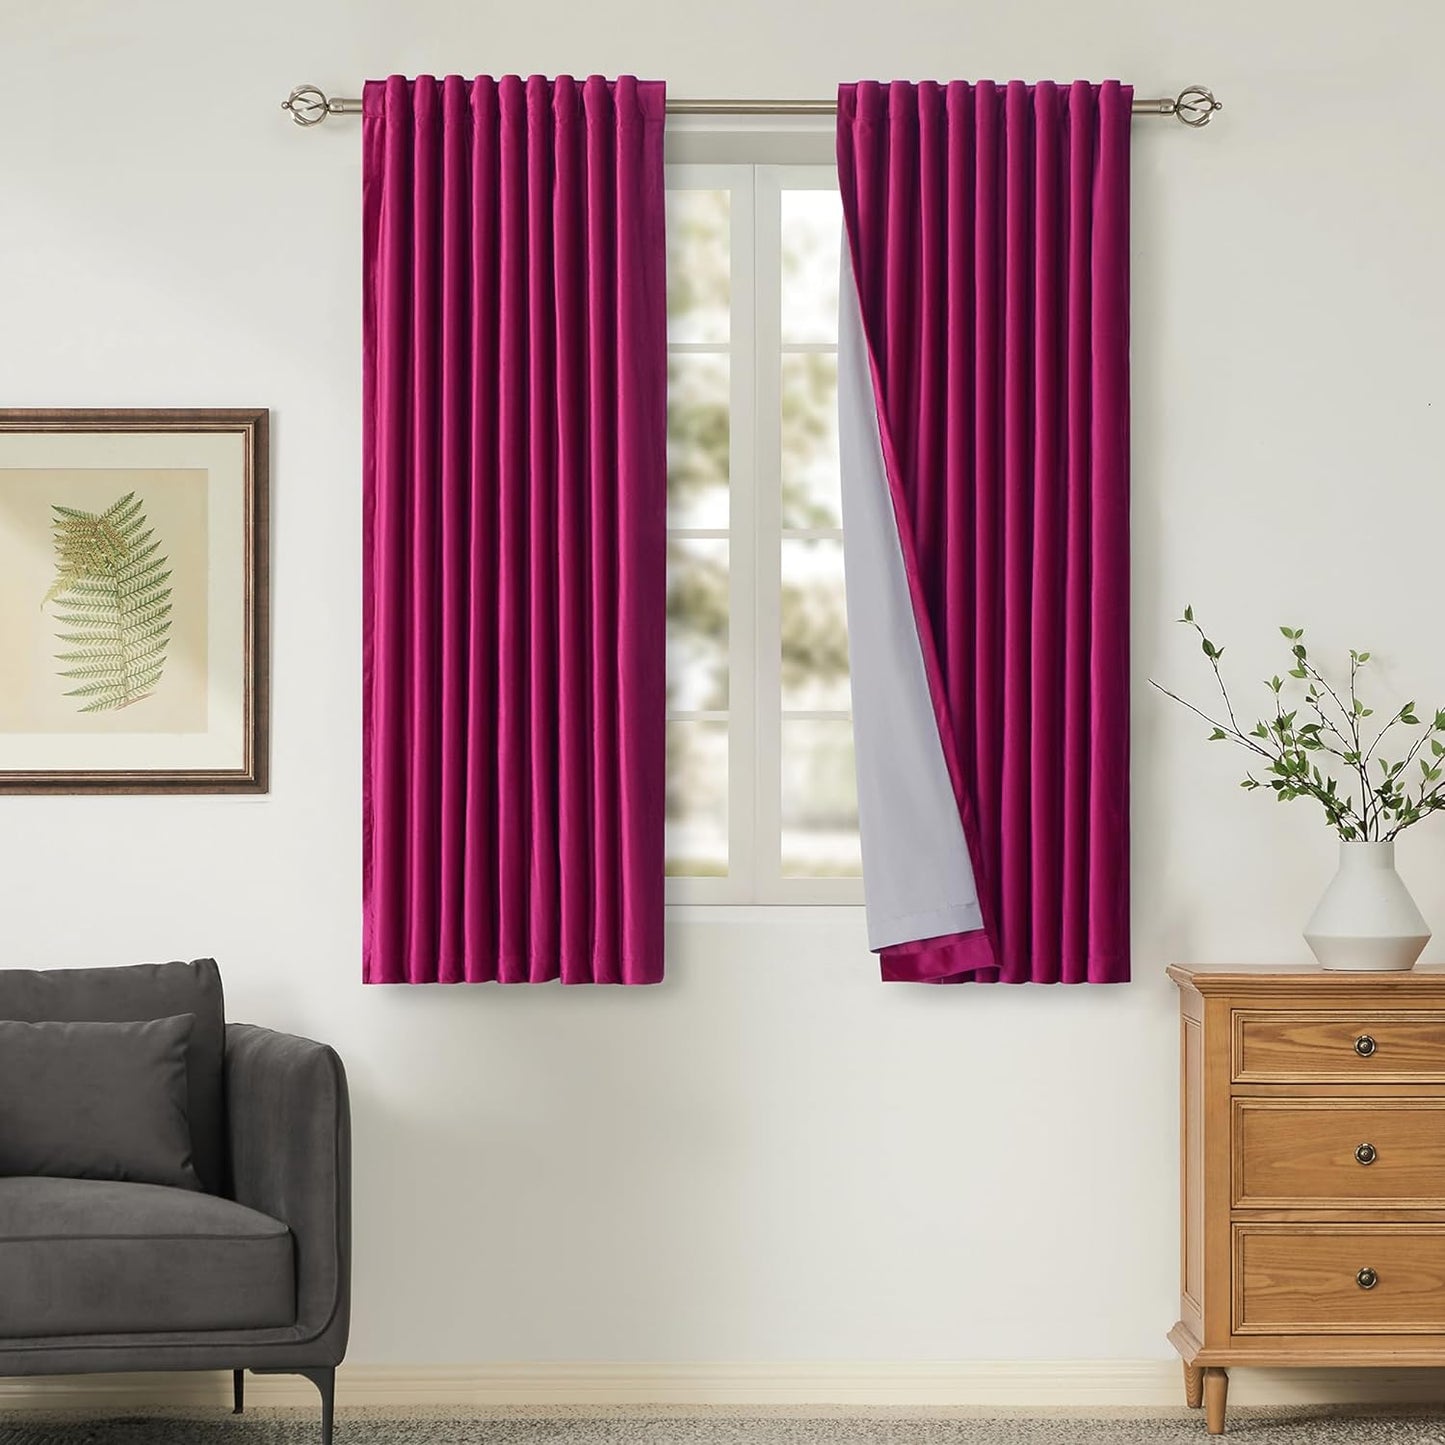 100% Blackout Ivory off White Velvet Curtains 108 Inch Long for Living Room,Set of 2 Panels Liner Rod Pocket Back Tab Thermal Window Drapes Room Darkening Heavy Decorative Curtains for Bedroom  PRIMROSE Hot Pink 52X63 Inches 